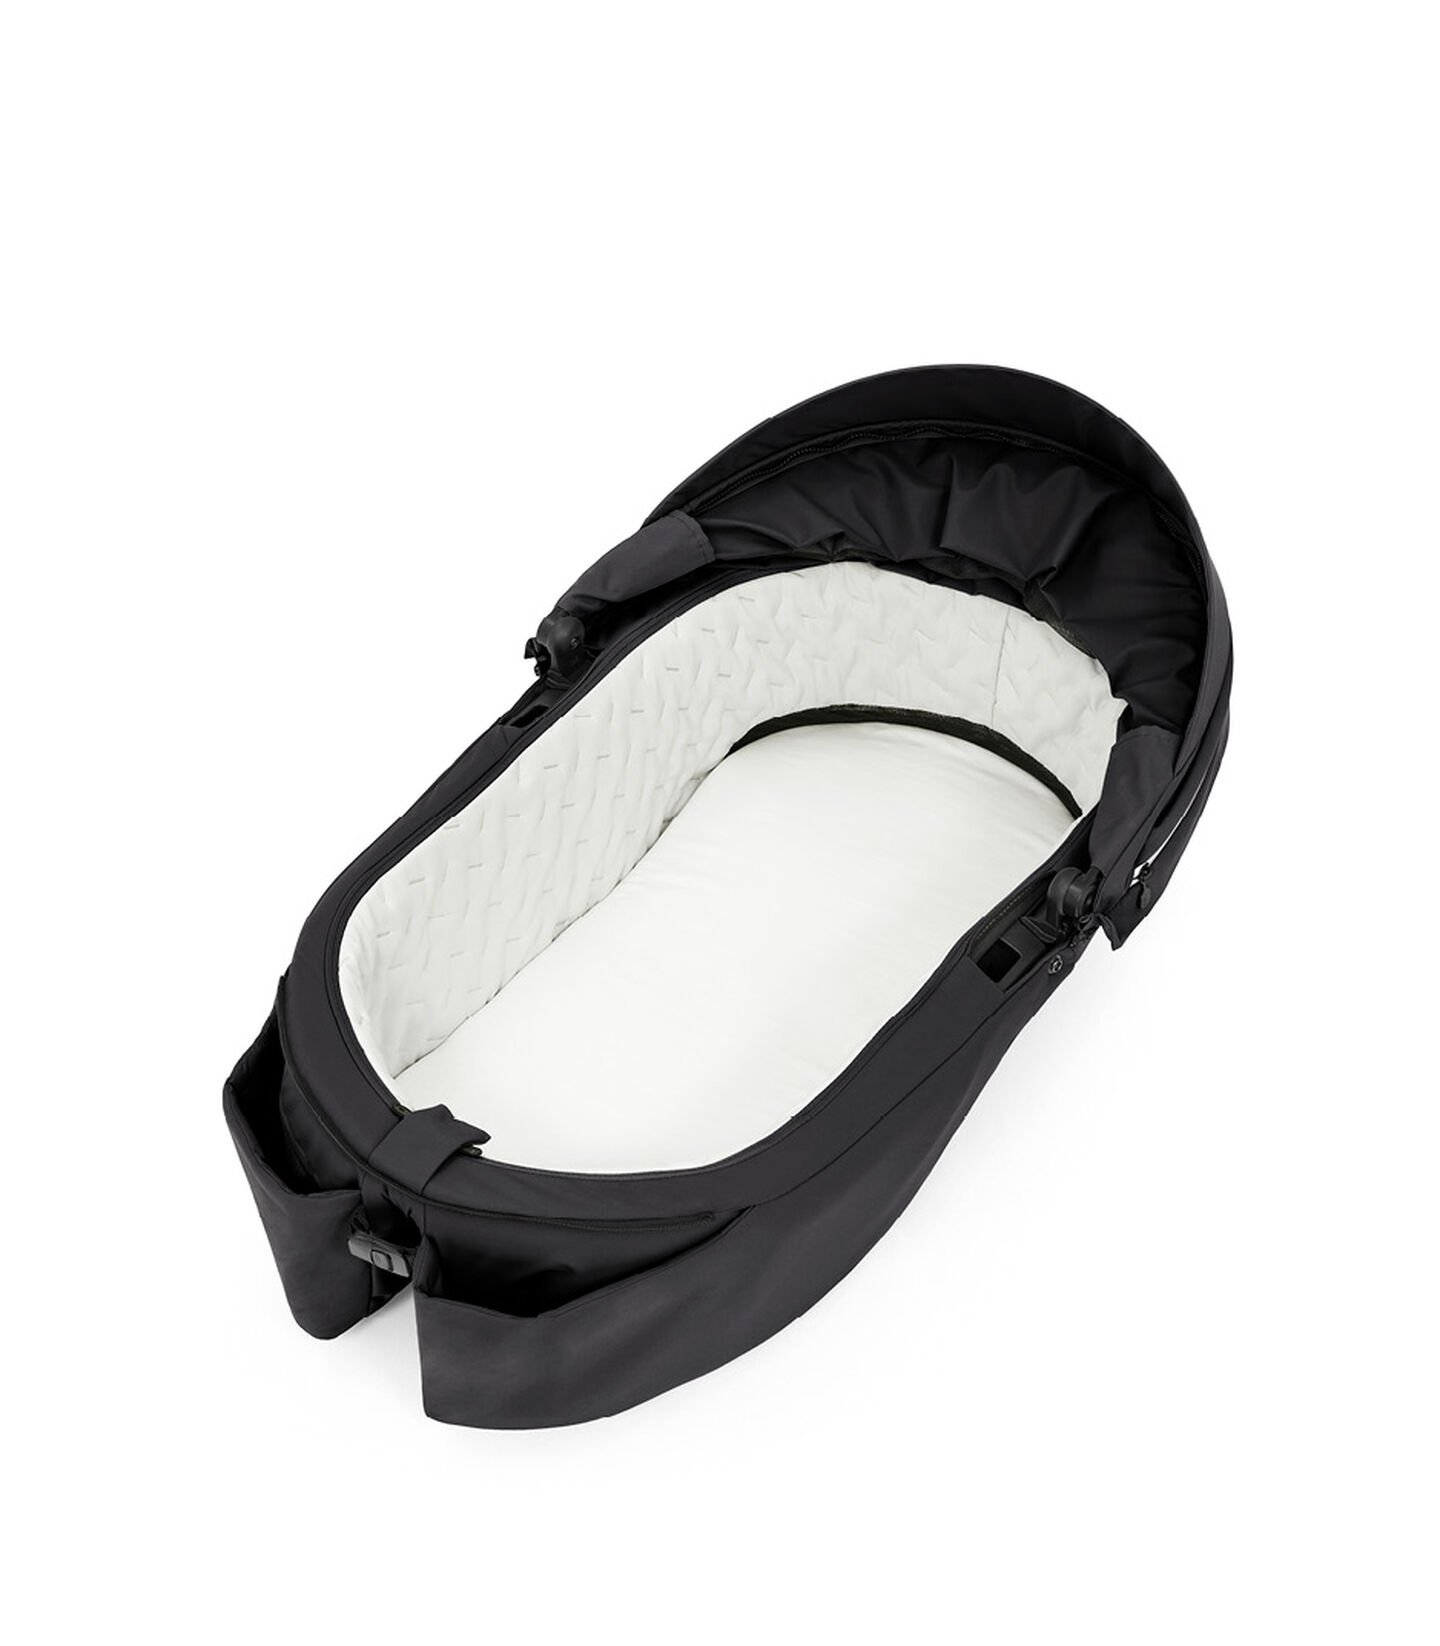 Stokke® Xplory® X Carry Cot Rich Black, 深黑色, mainview view 6